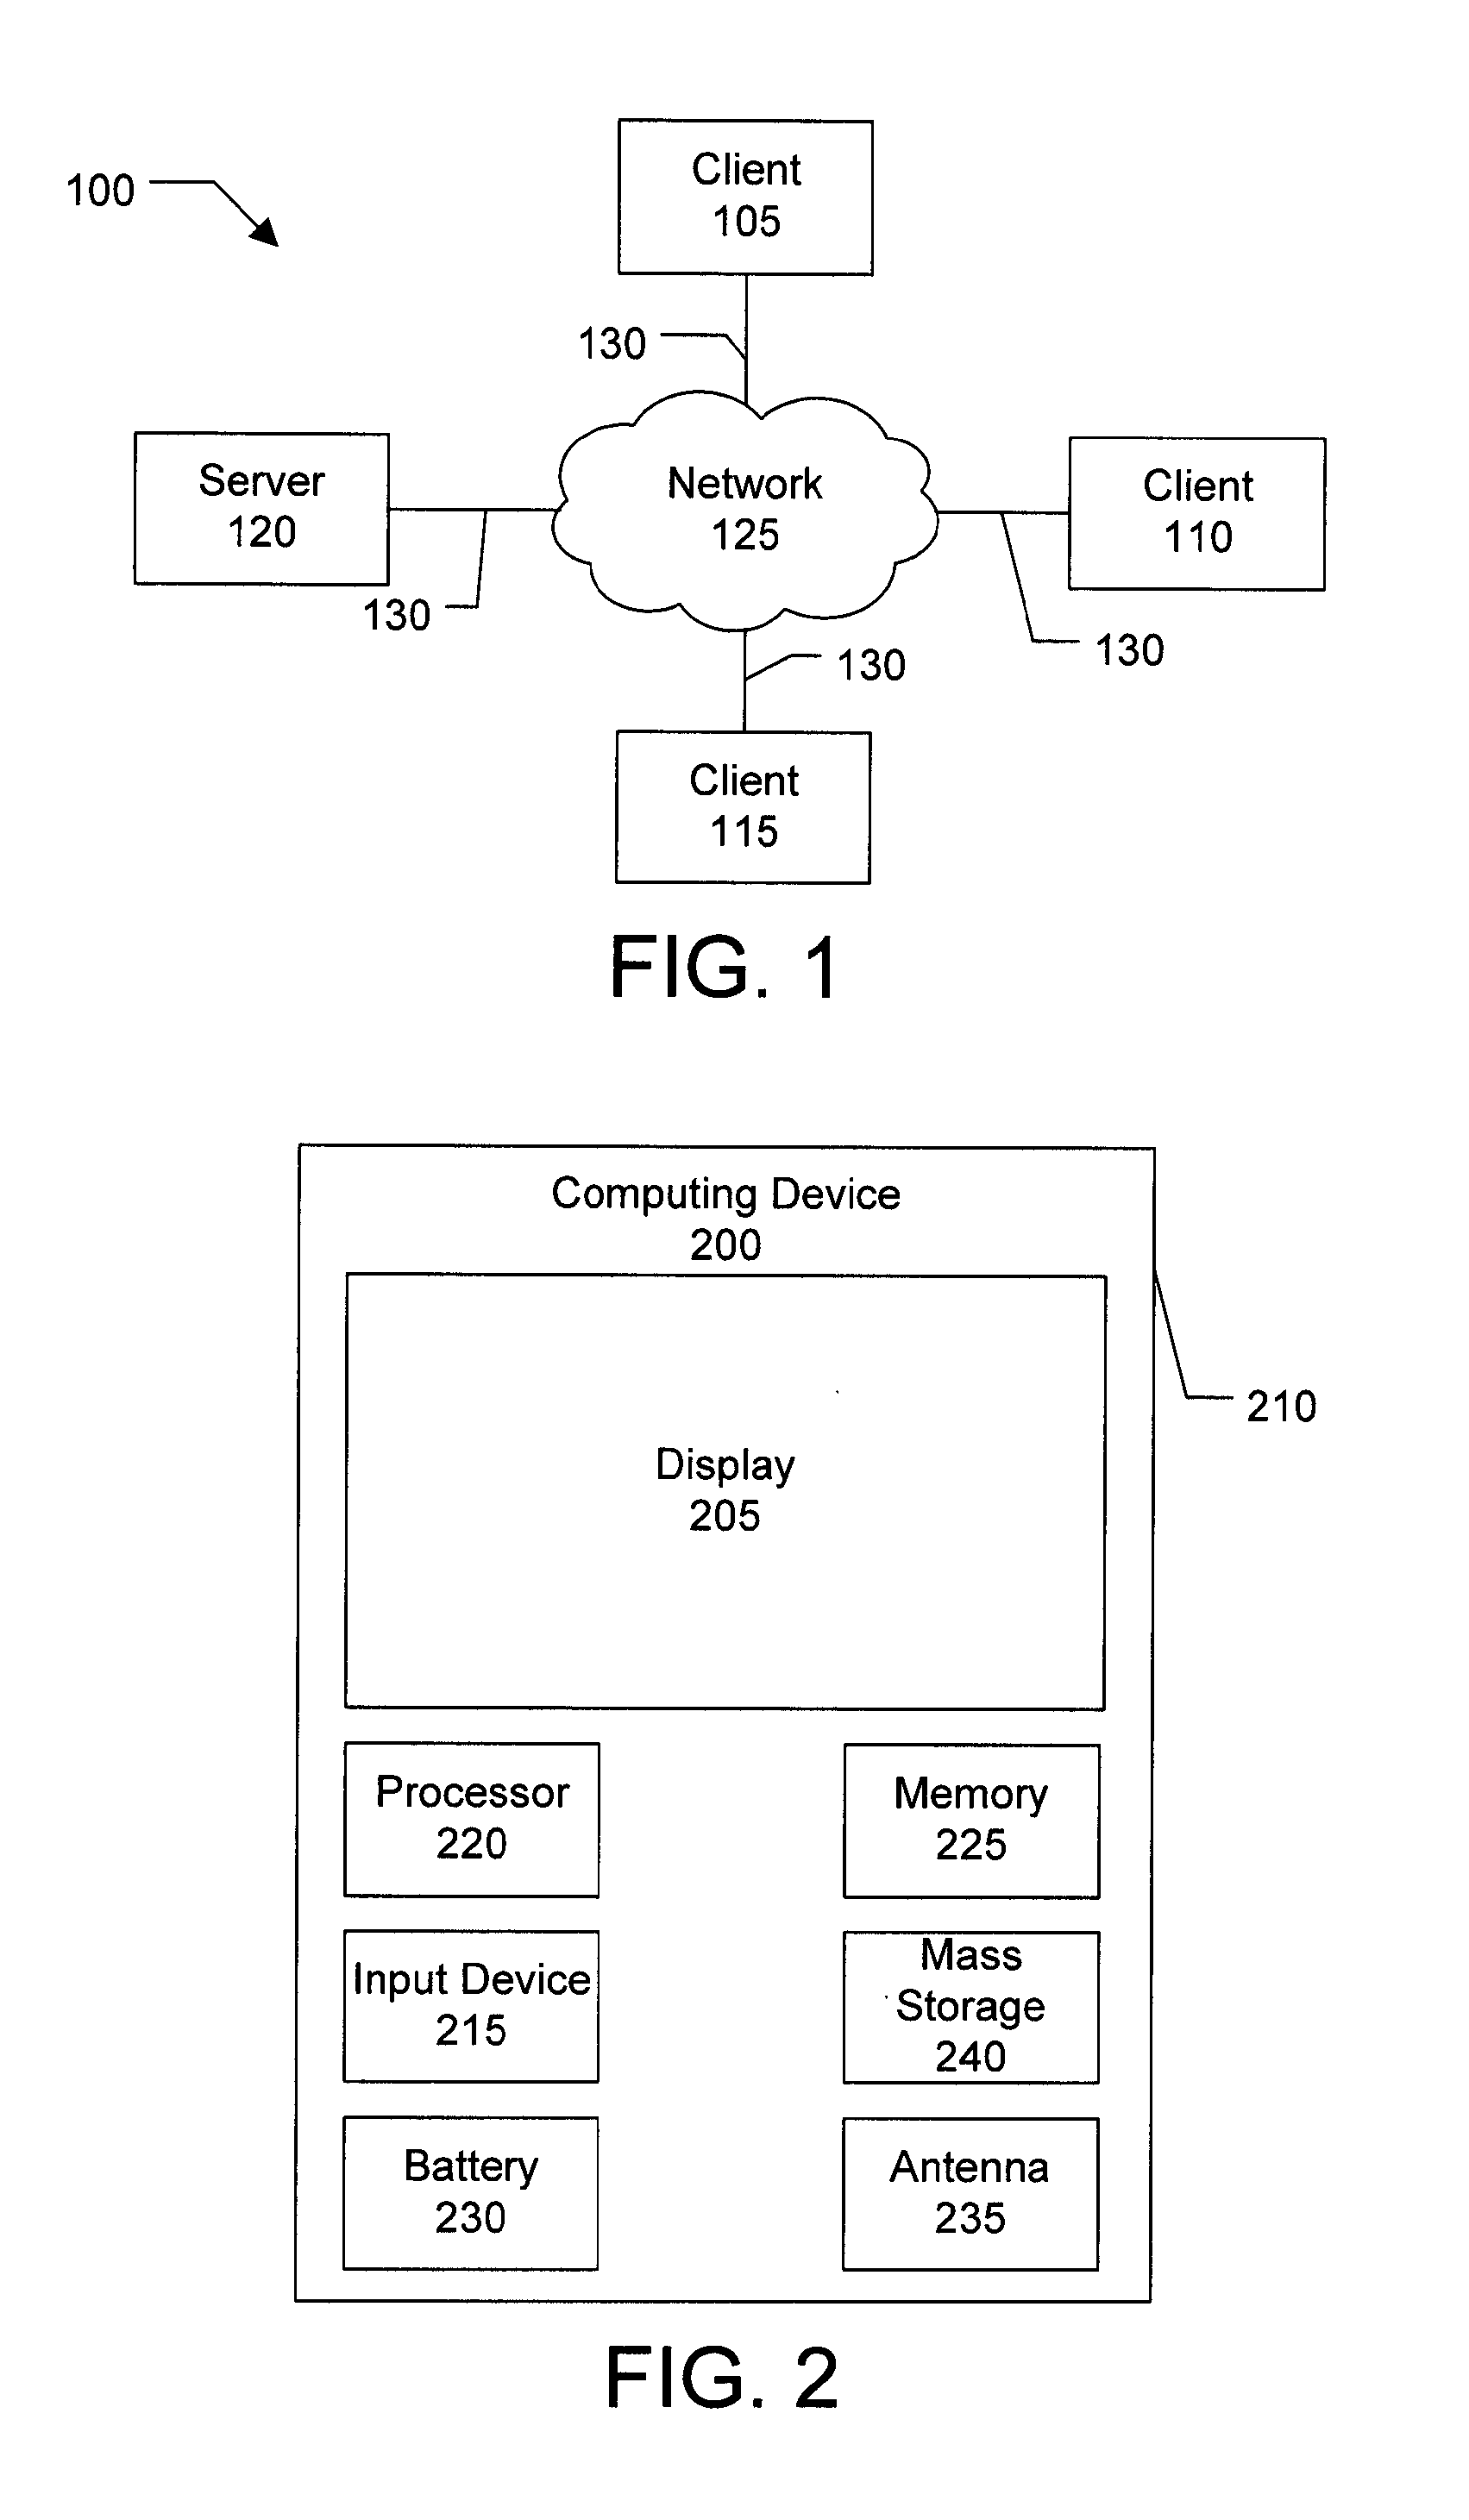 Distributed monitoring, evaluation, and response for multiple devices